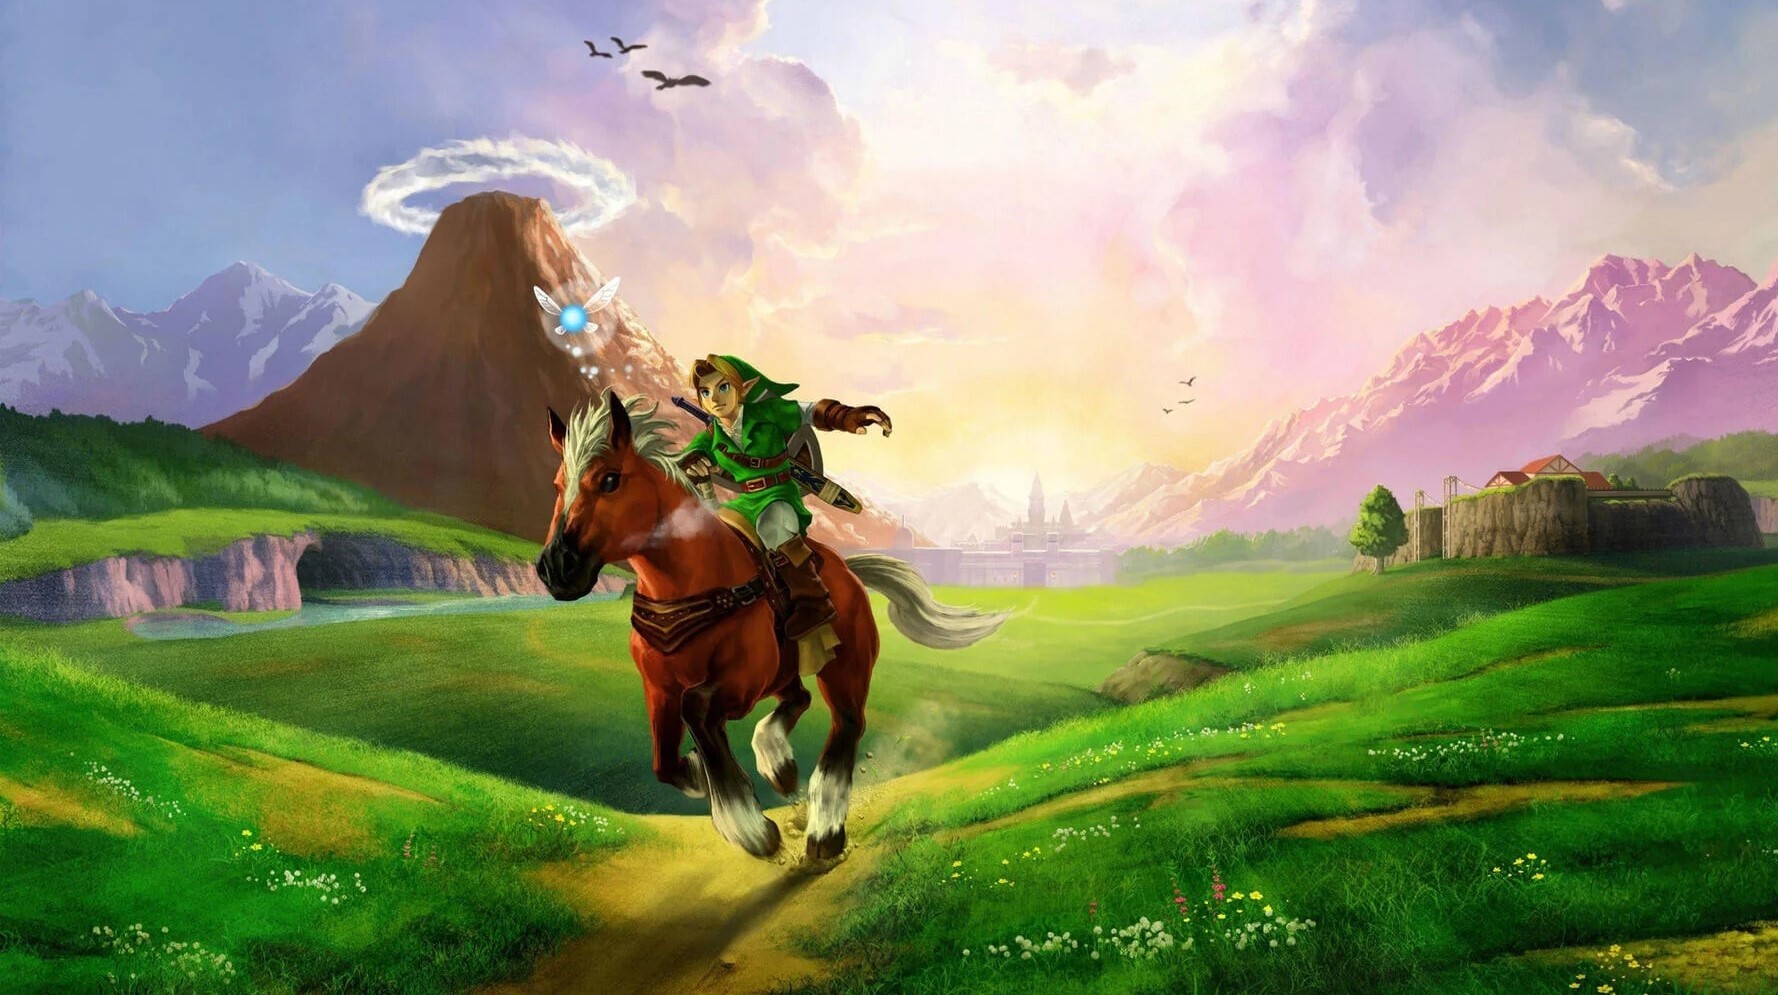 Top 50 Video Games of All Time, According to Metacritic